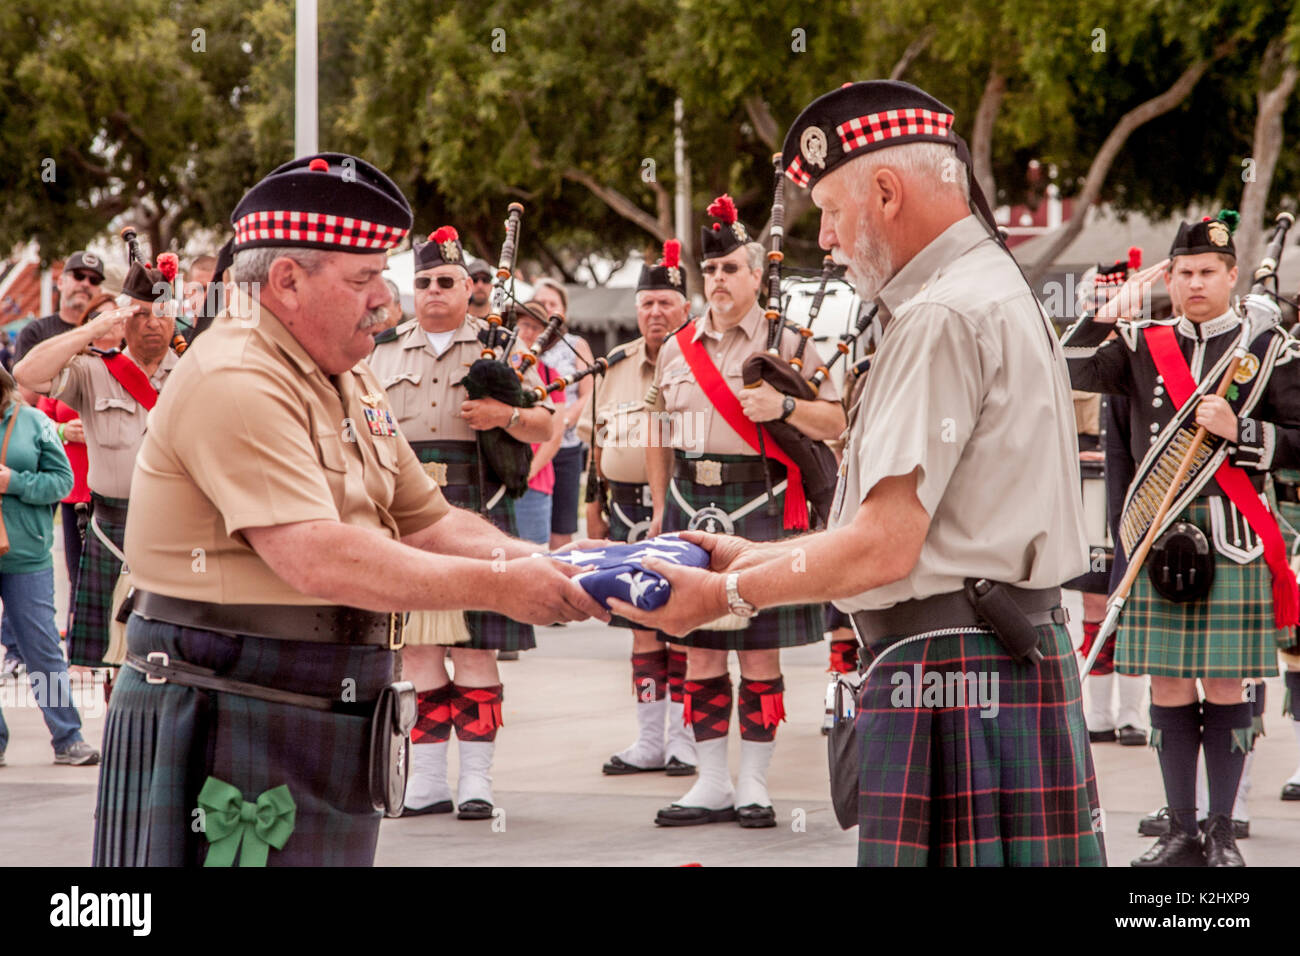 A Scottish American flag of honor is presented in solemn ceremony at an ethnic festival in Costa Mesa, CA. Stock Photo